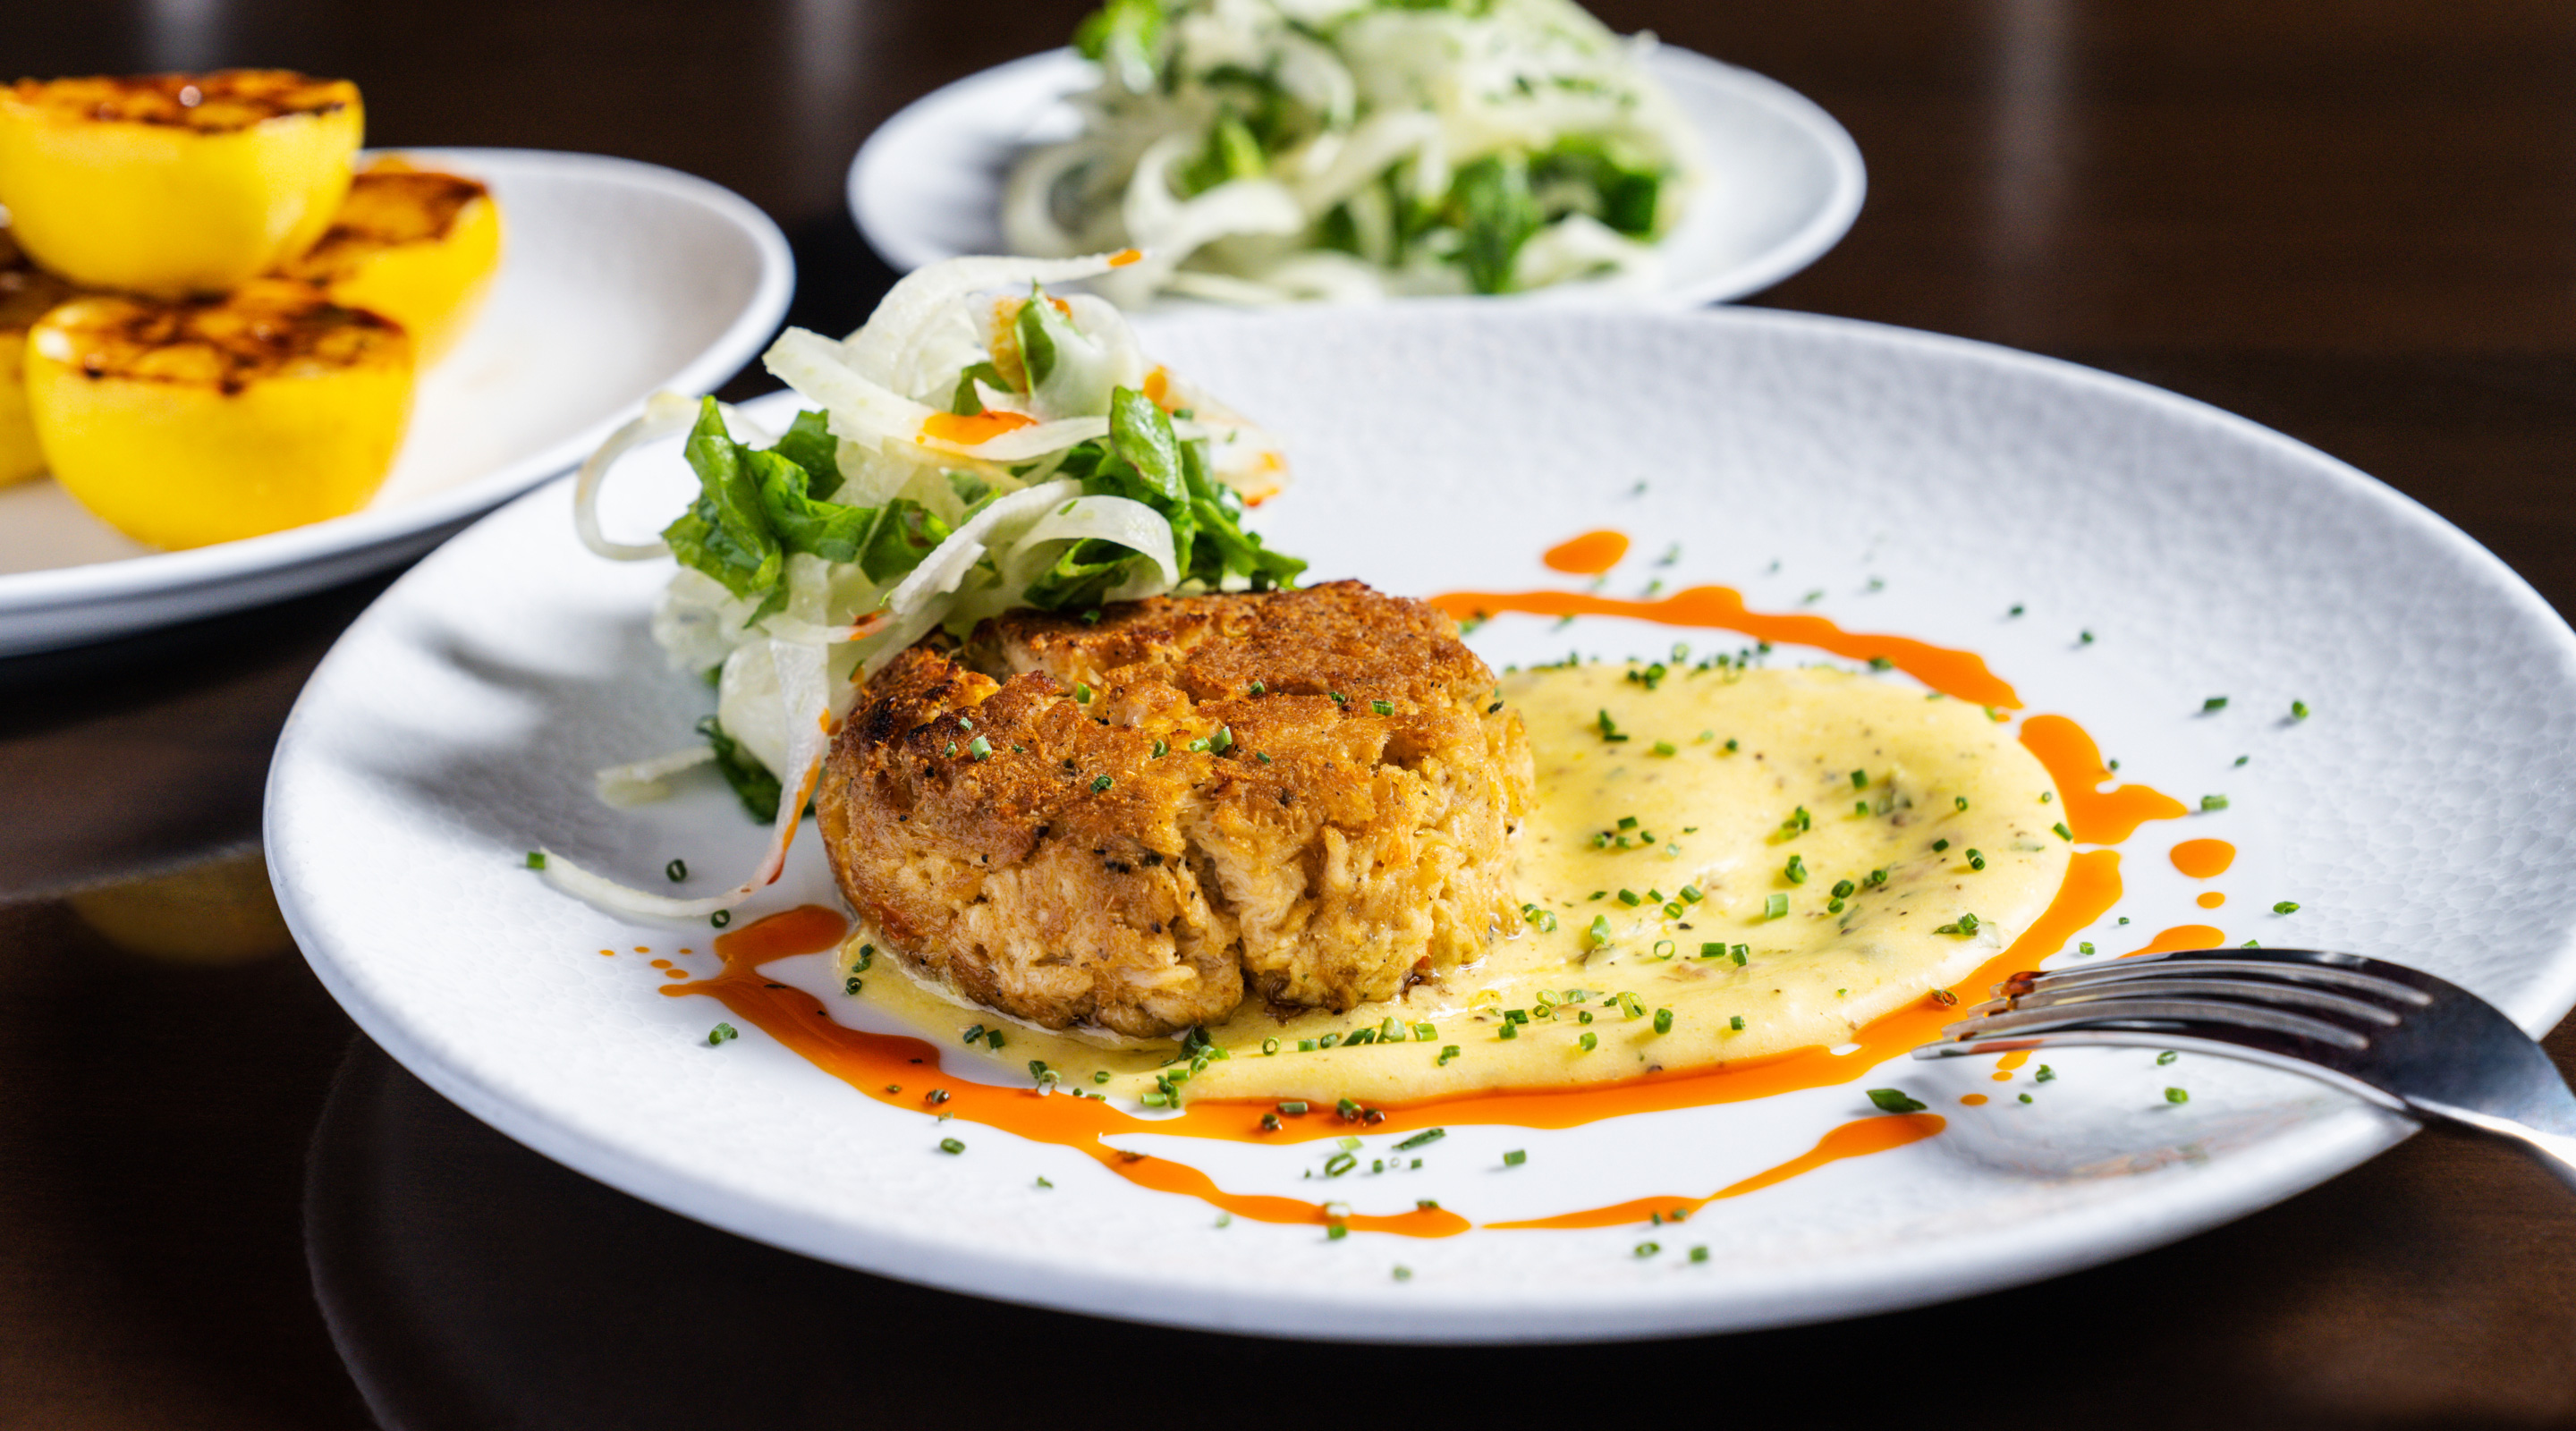 Cajun-spiced crab cakes with lemon caper aioli, and fennel salad.